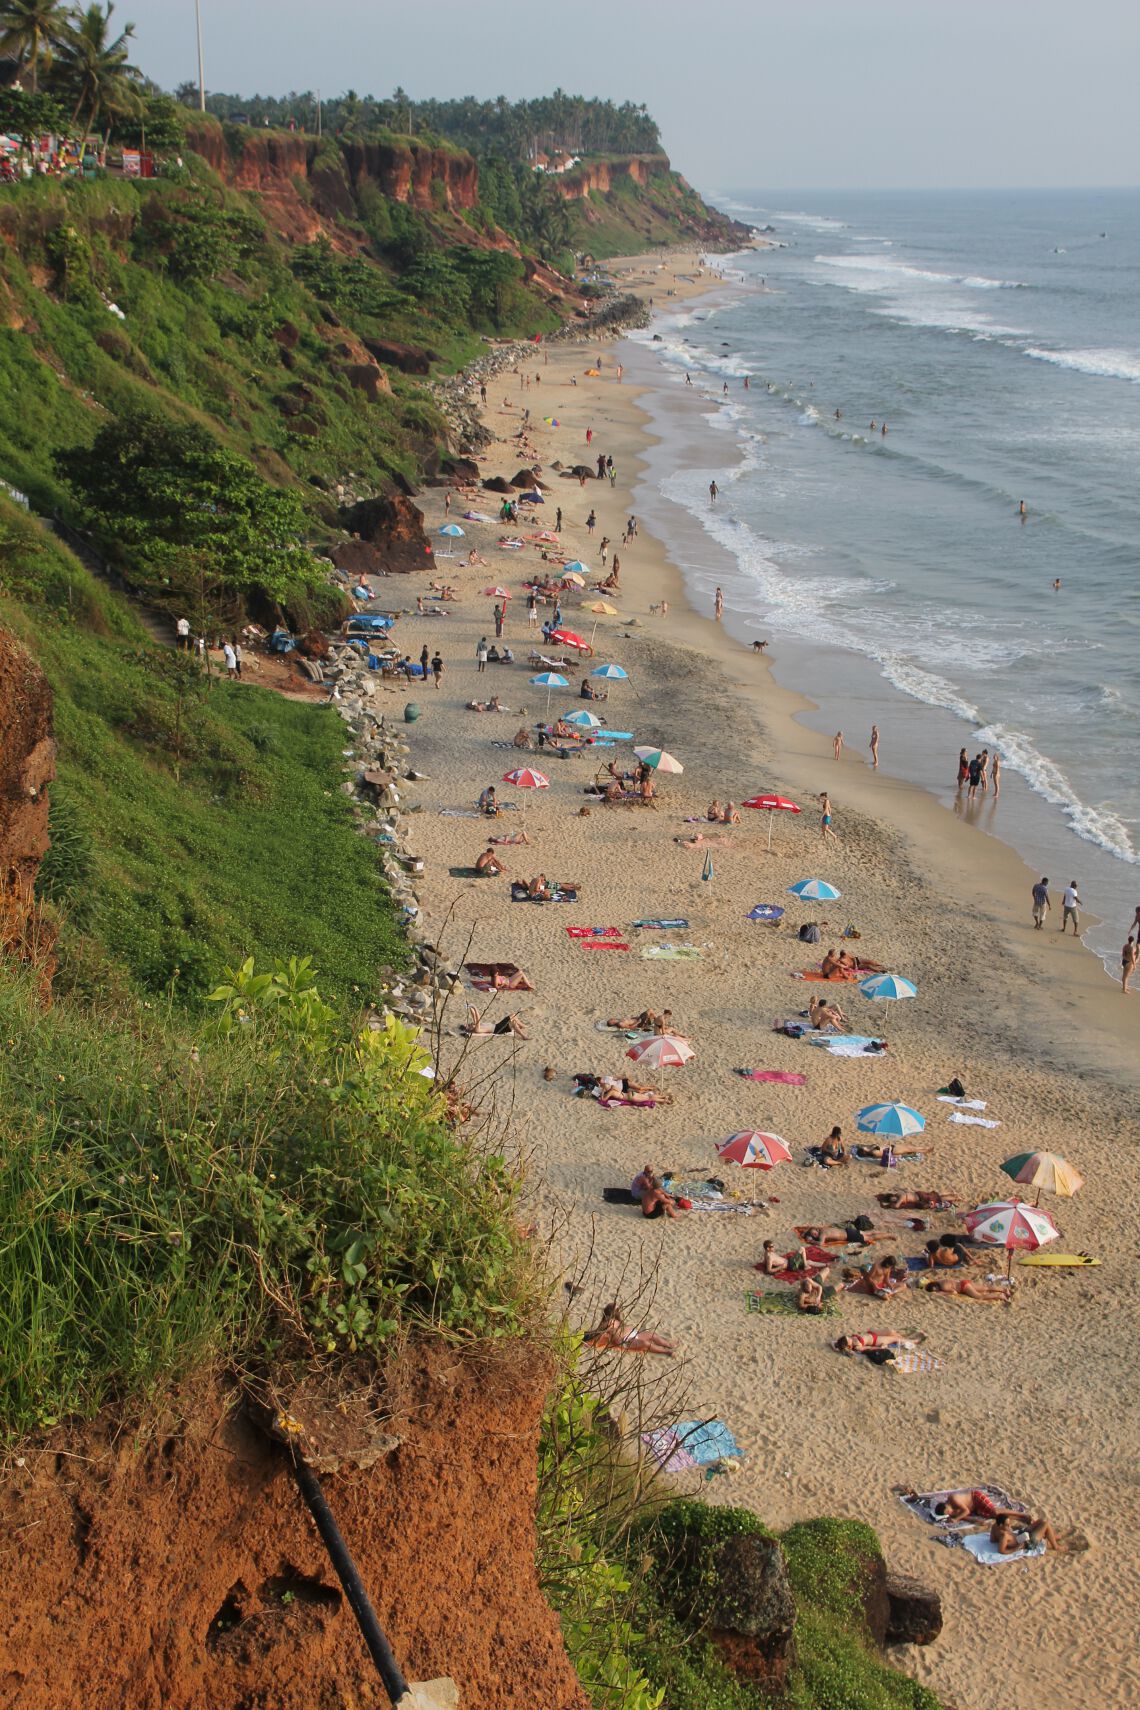 Tourists relax on the beach below cliffs in Varkala, India.